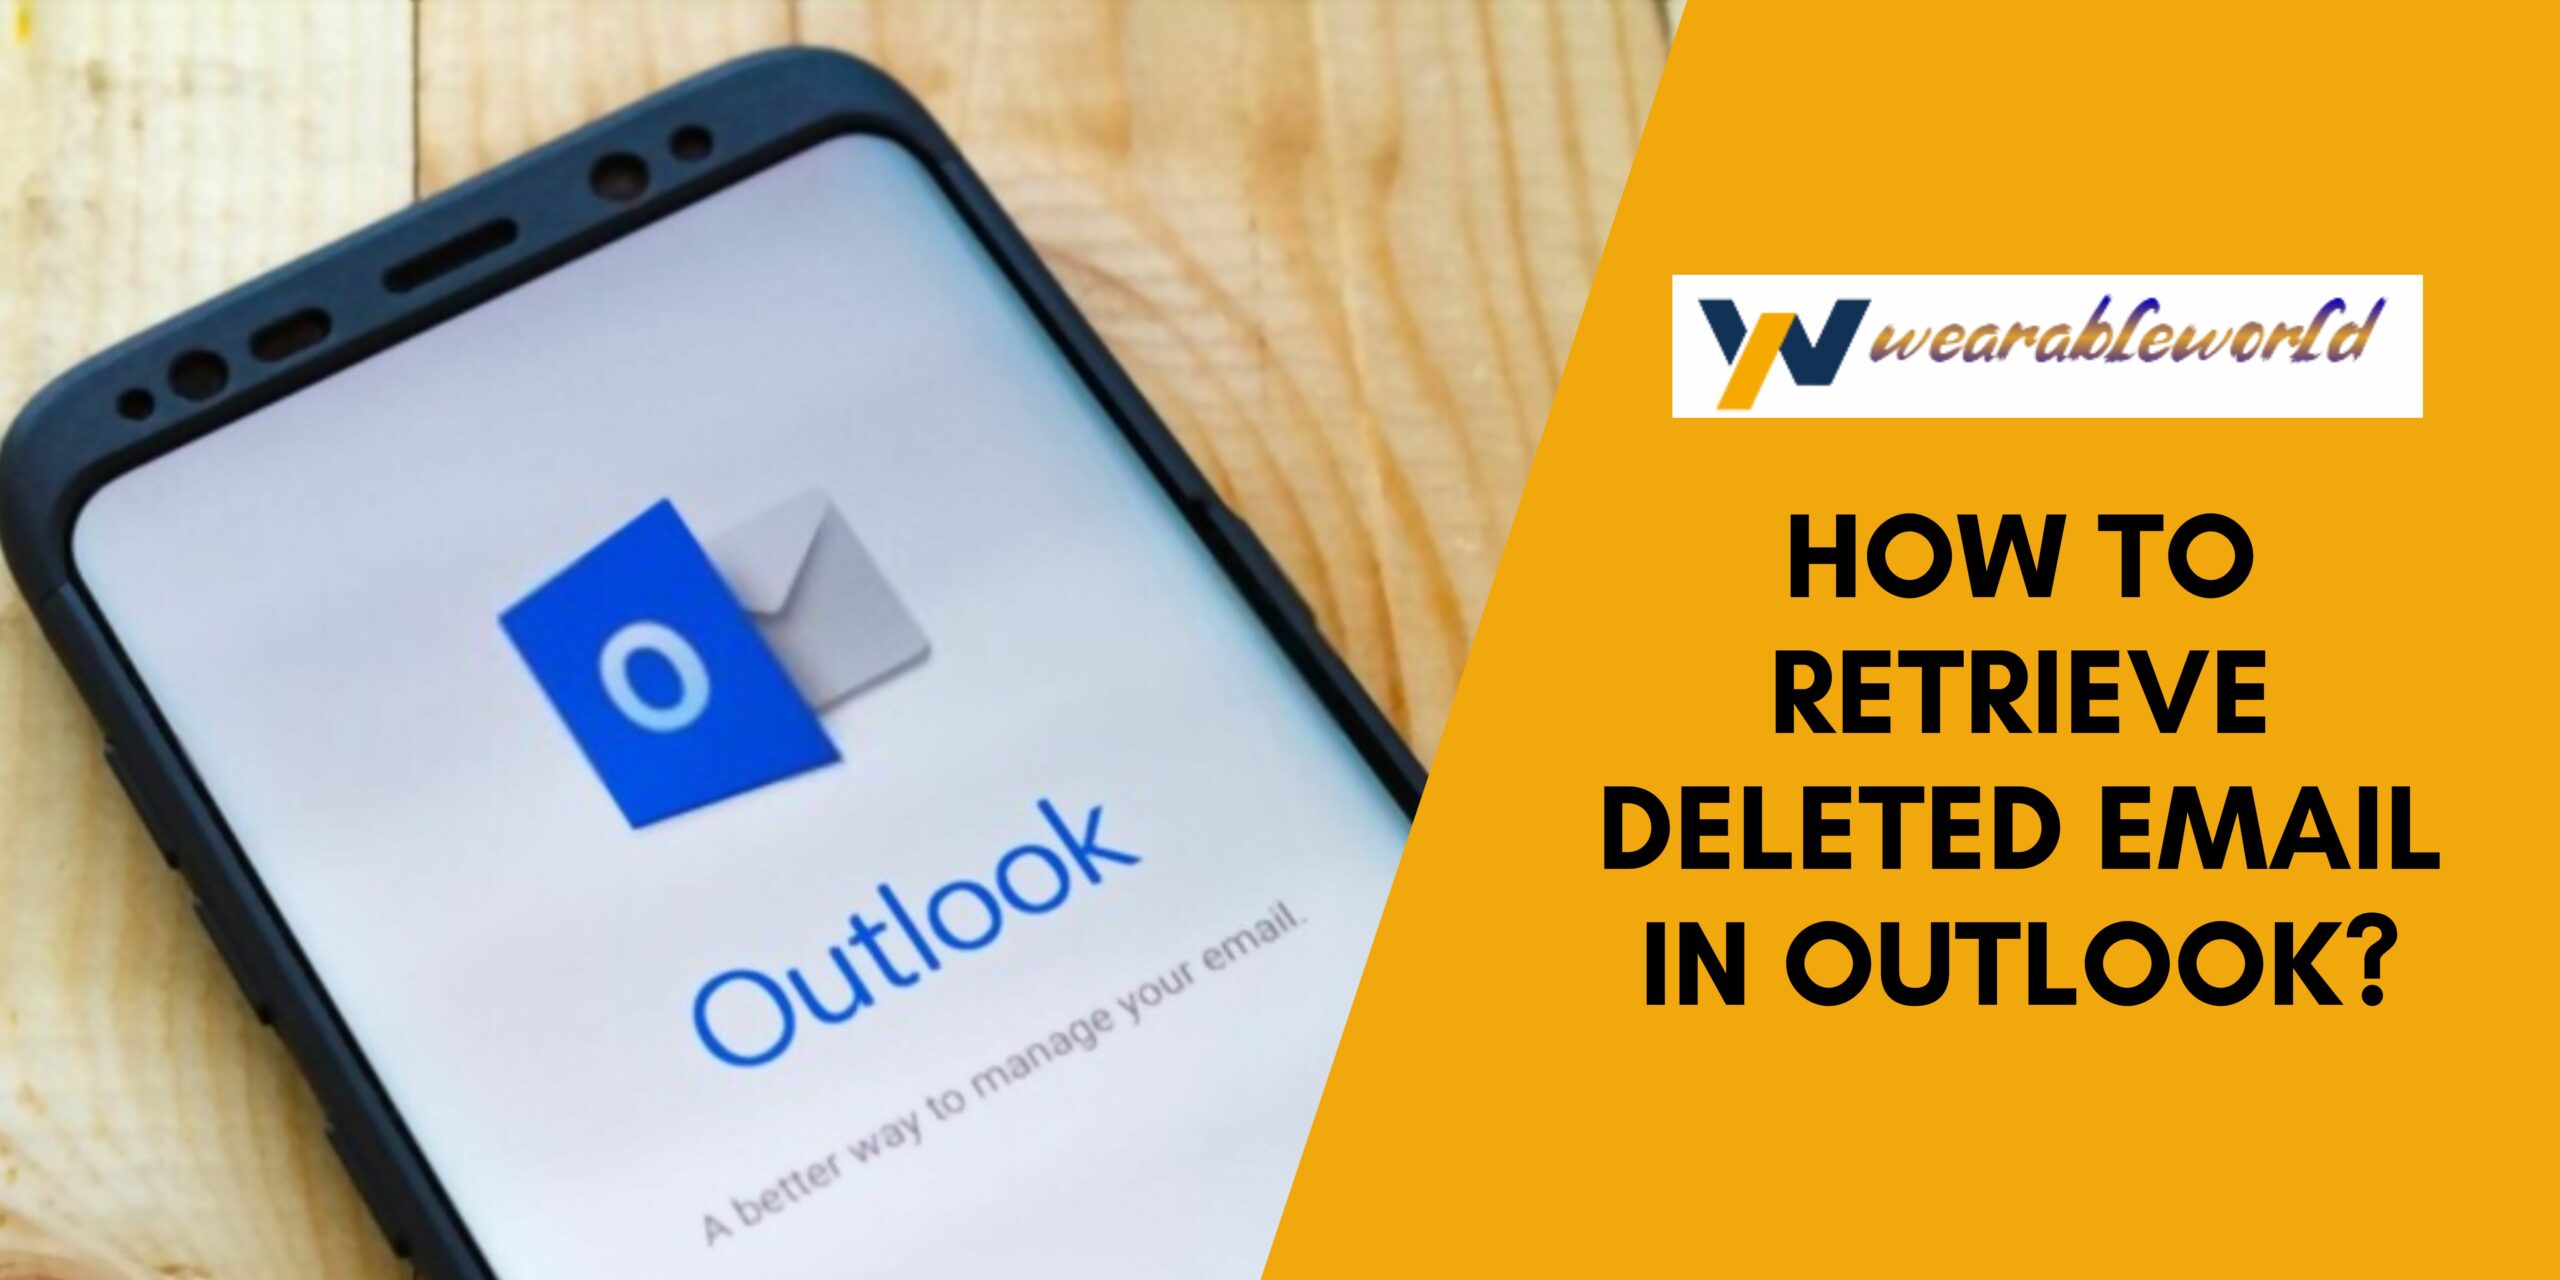 Retrieve deleted email in outlook